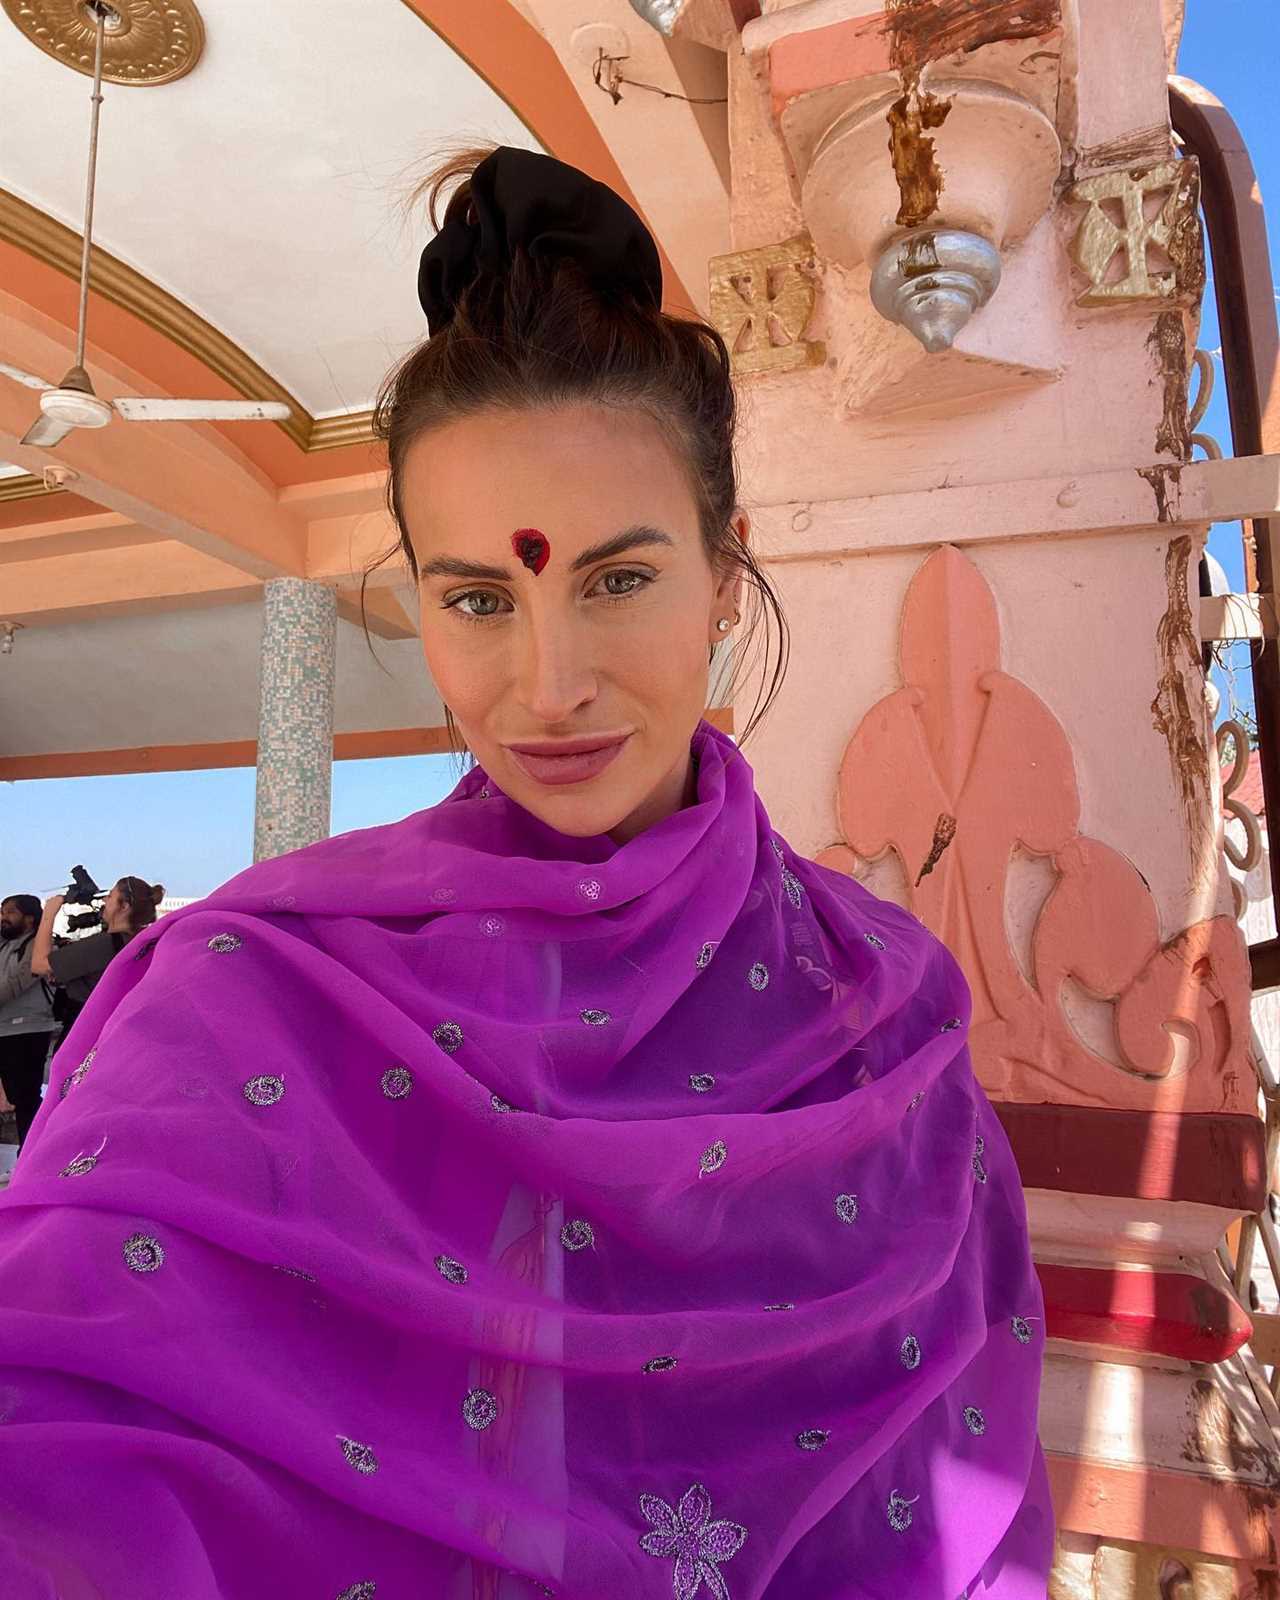 Inside Ferne McCann’s ‘life changing’ India trip as she begs to meet Sam Faiers after voice note row